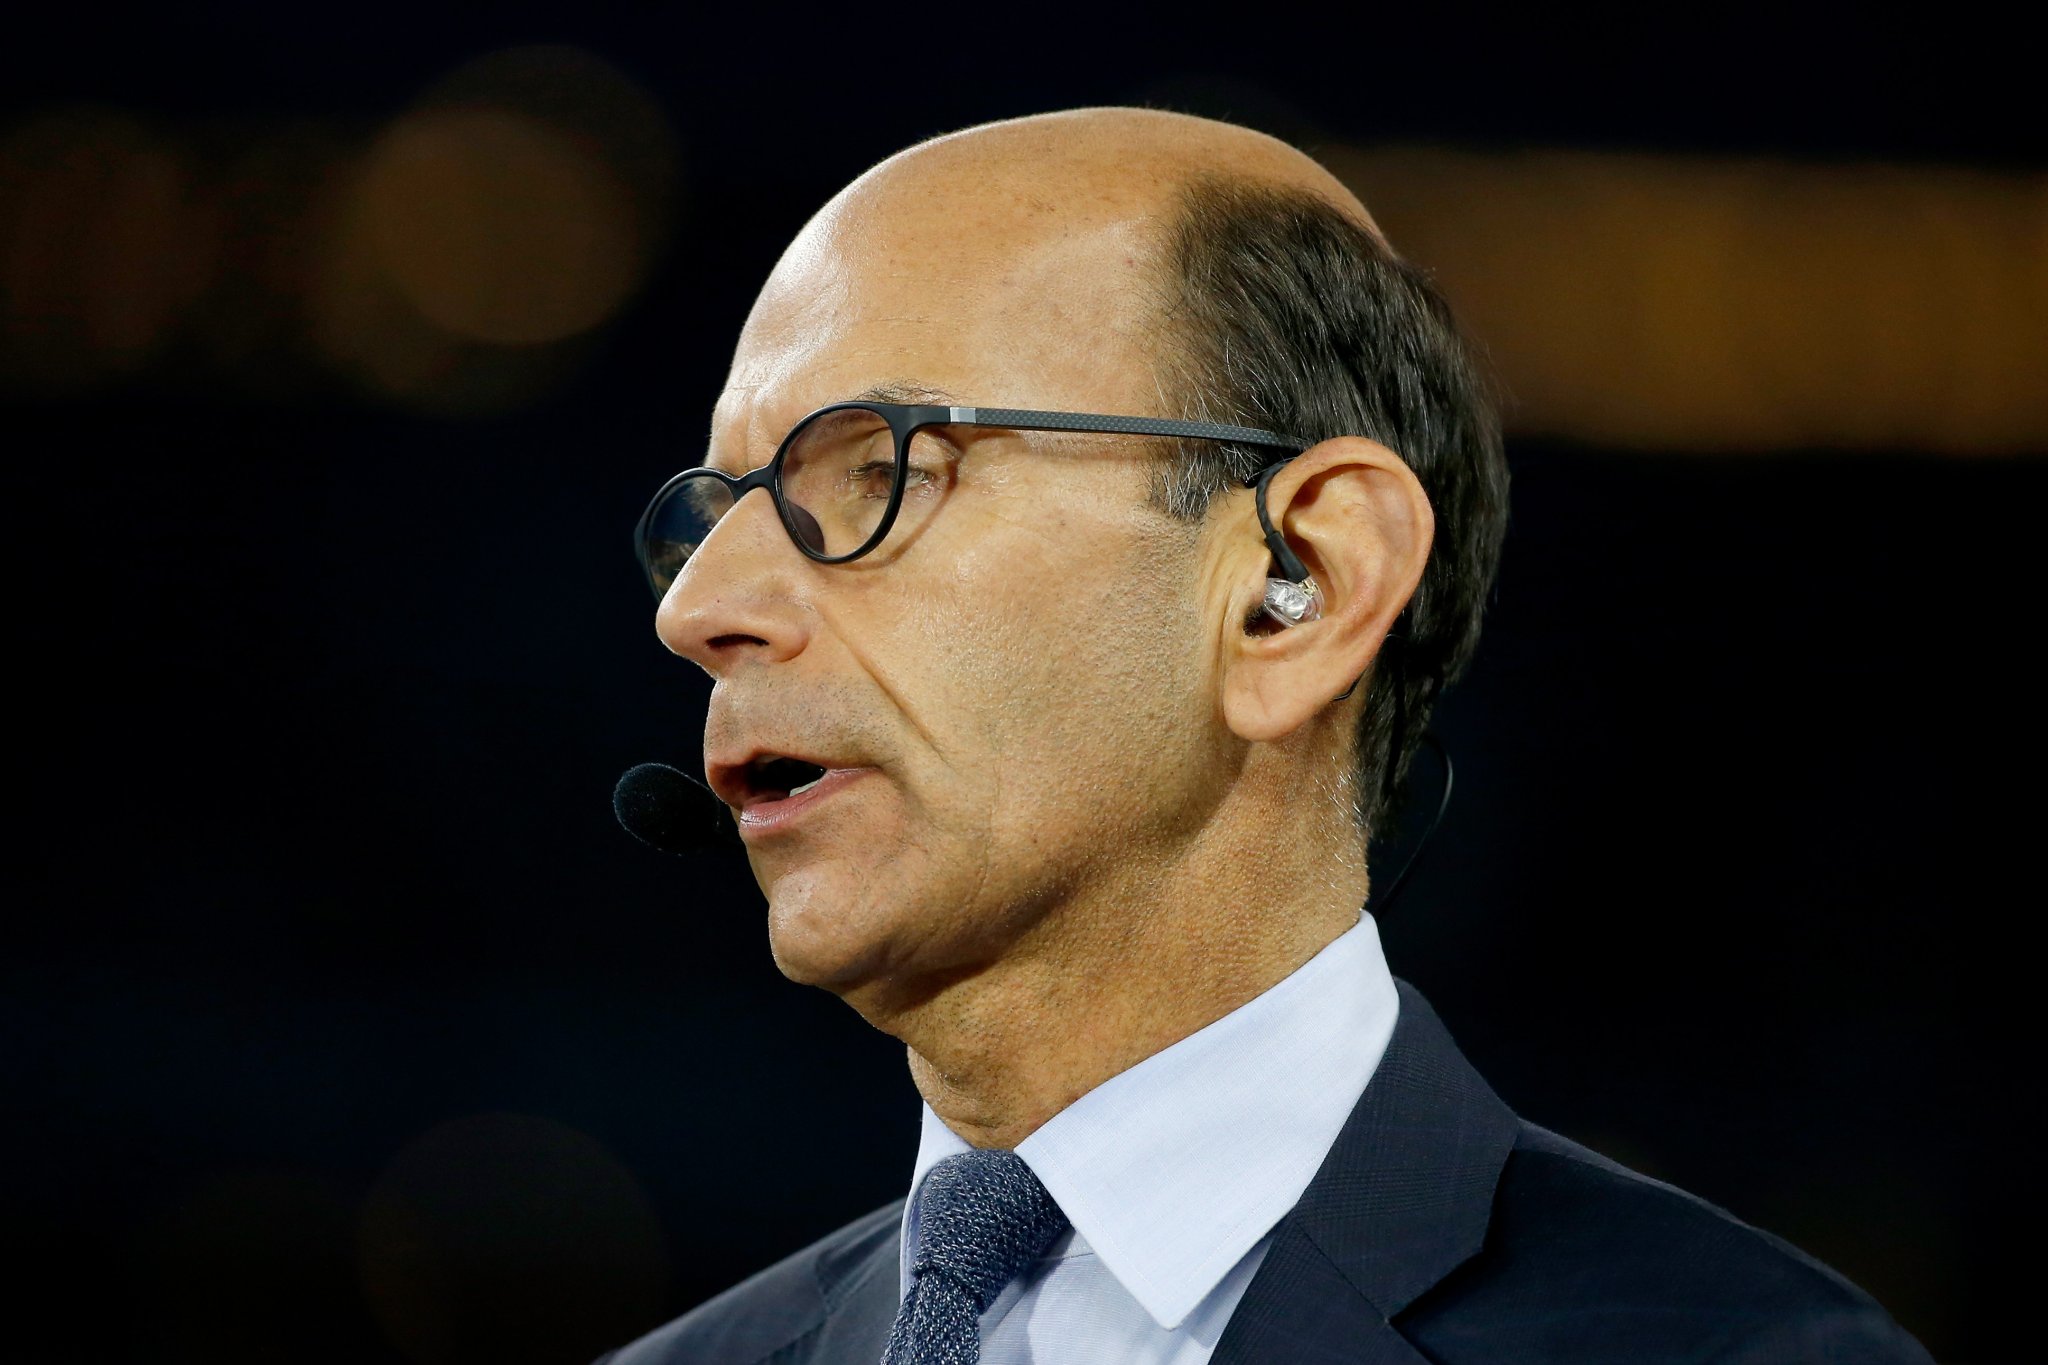 Paul Finebaum Shares His Opinion As To Why Lincoln Riley Left For USC